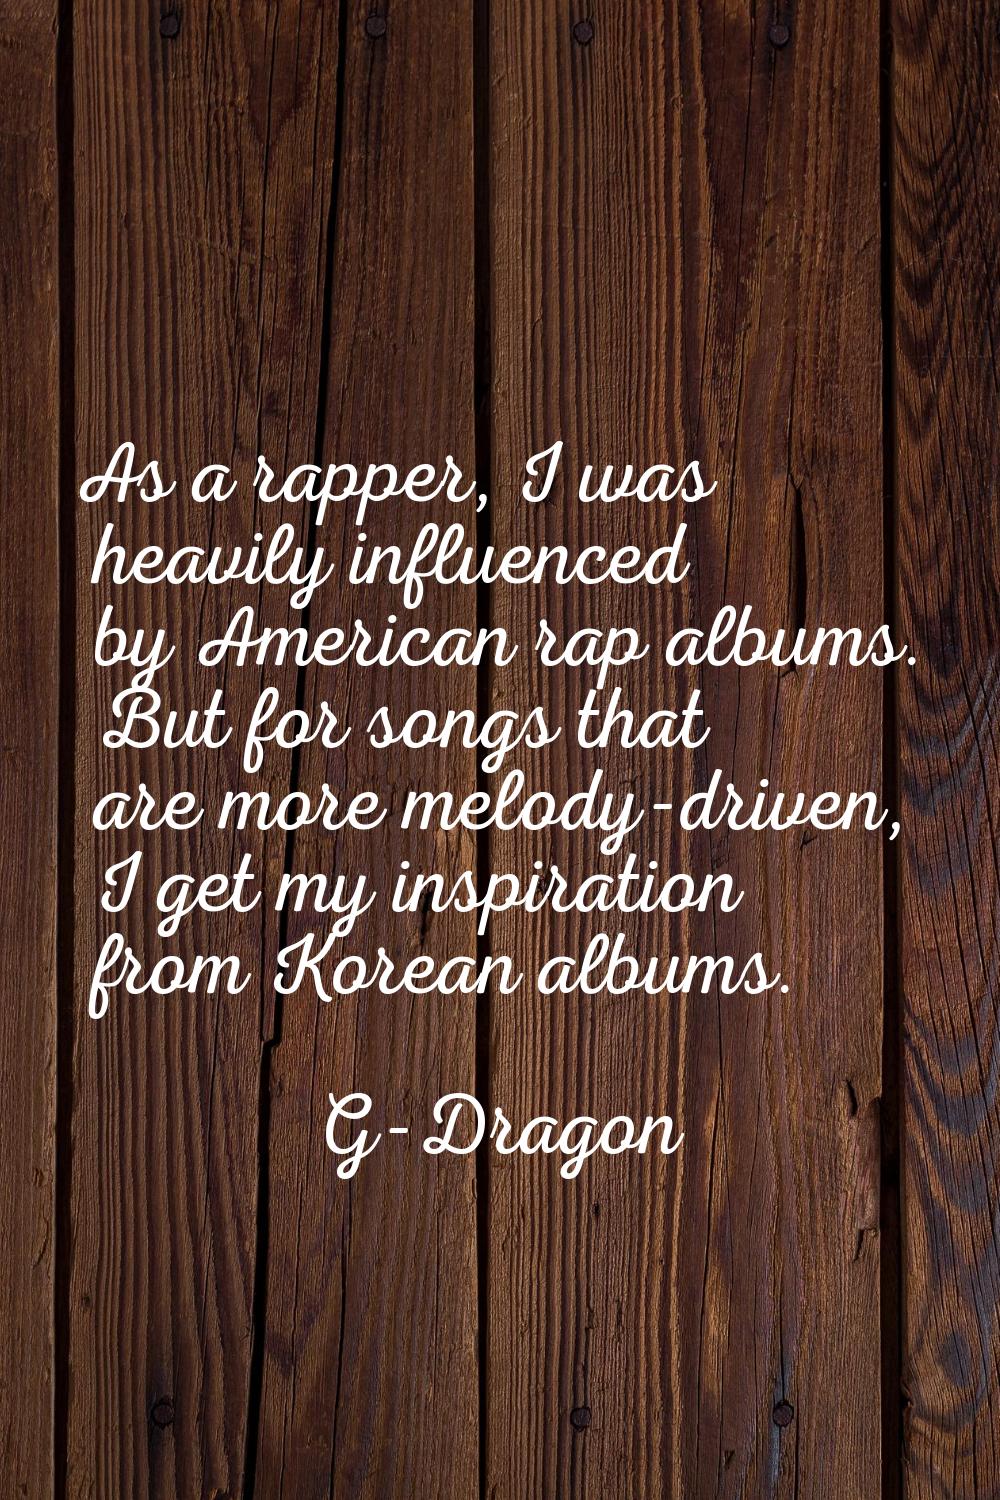 As a rapper, I was heavily influenced by American rap albums. But for songs that are more melody-dr